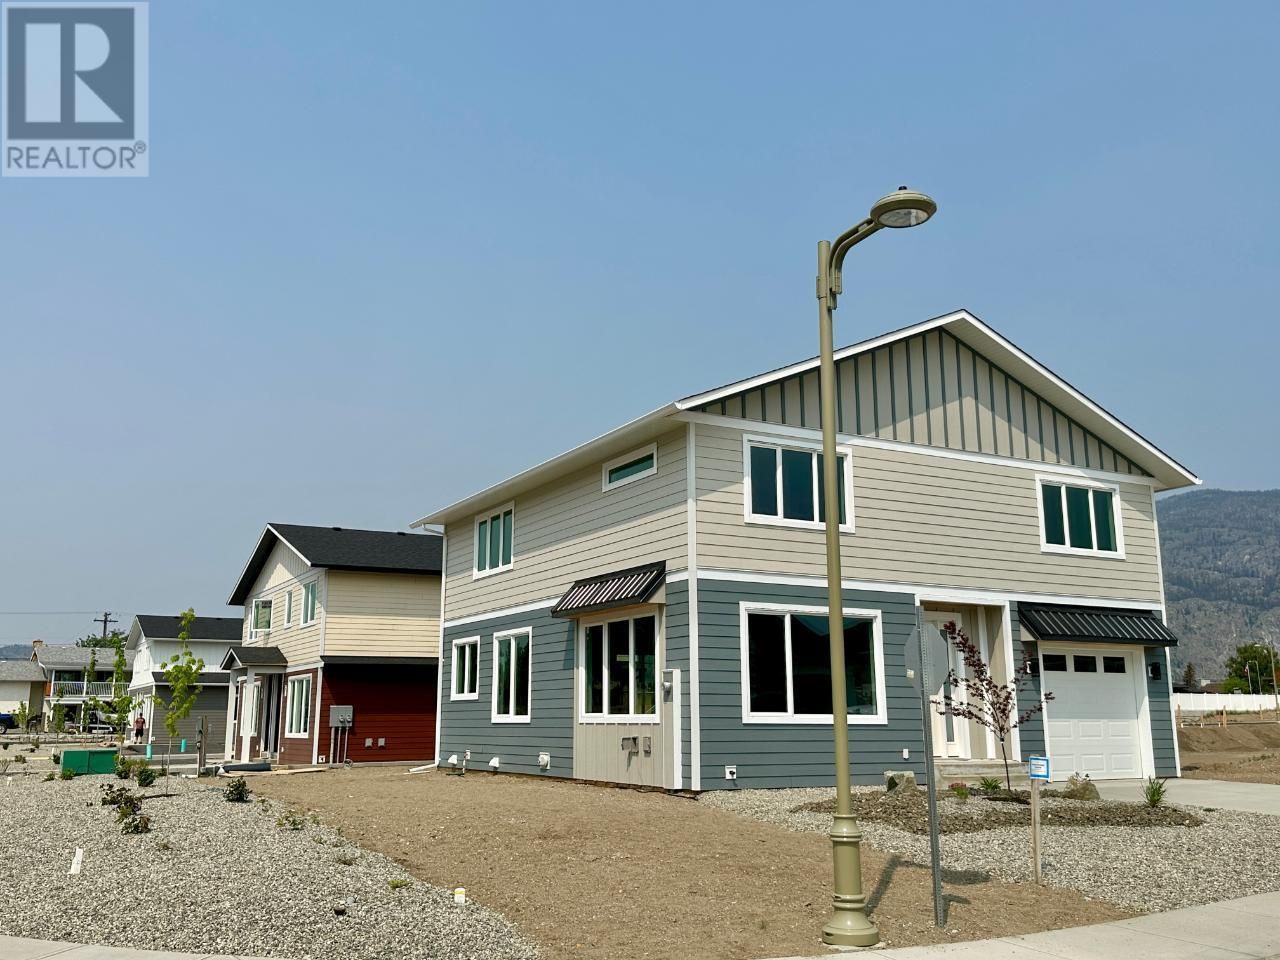 Main Photo: 2 WOOD DUCK Way in Osoyoos: House for sale : MLS®# 198205